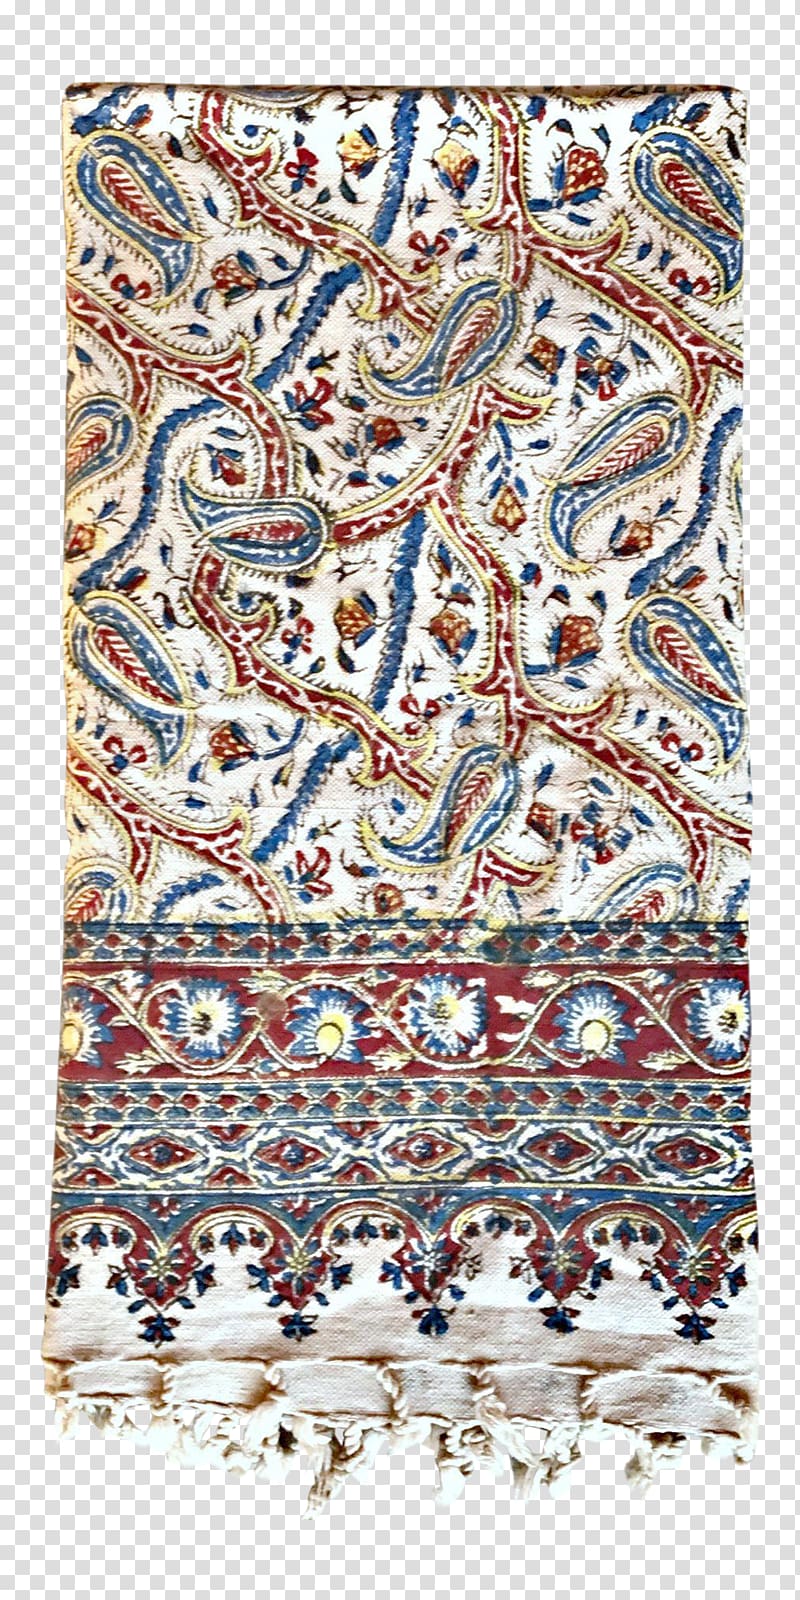 Textile Chairish Islamic rugs Antique Art, paisley transparent background PNG clipart